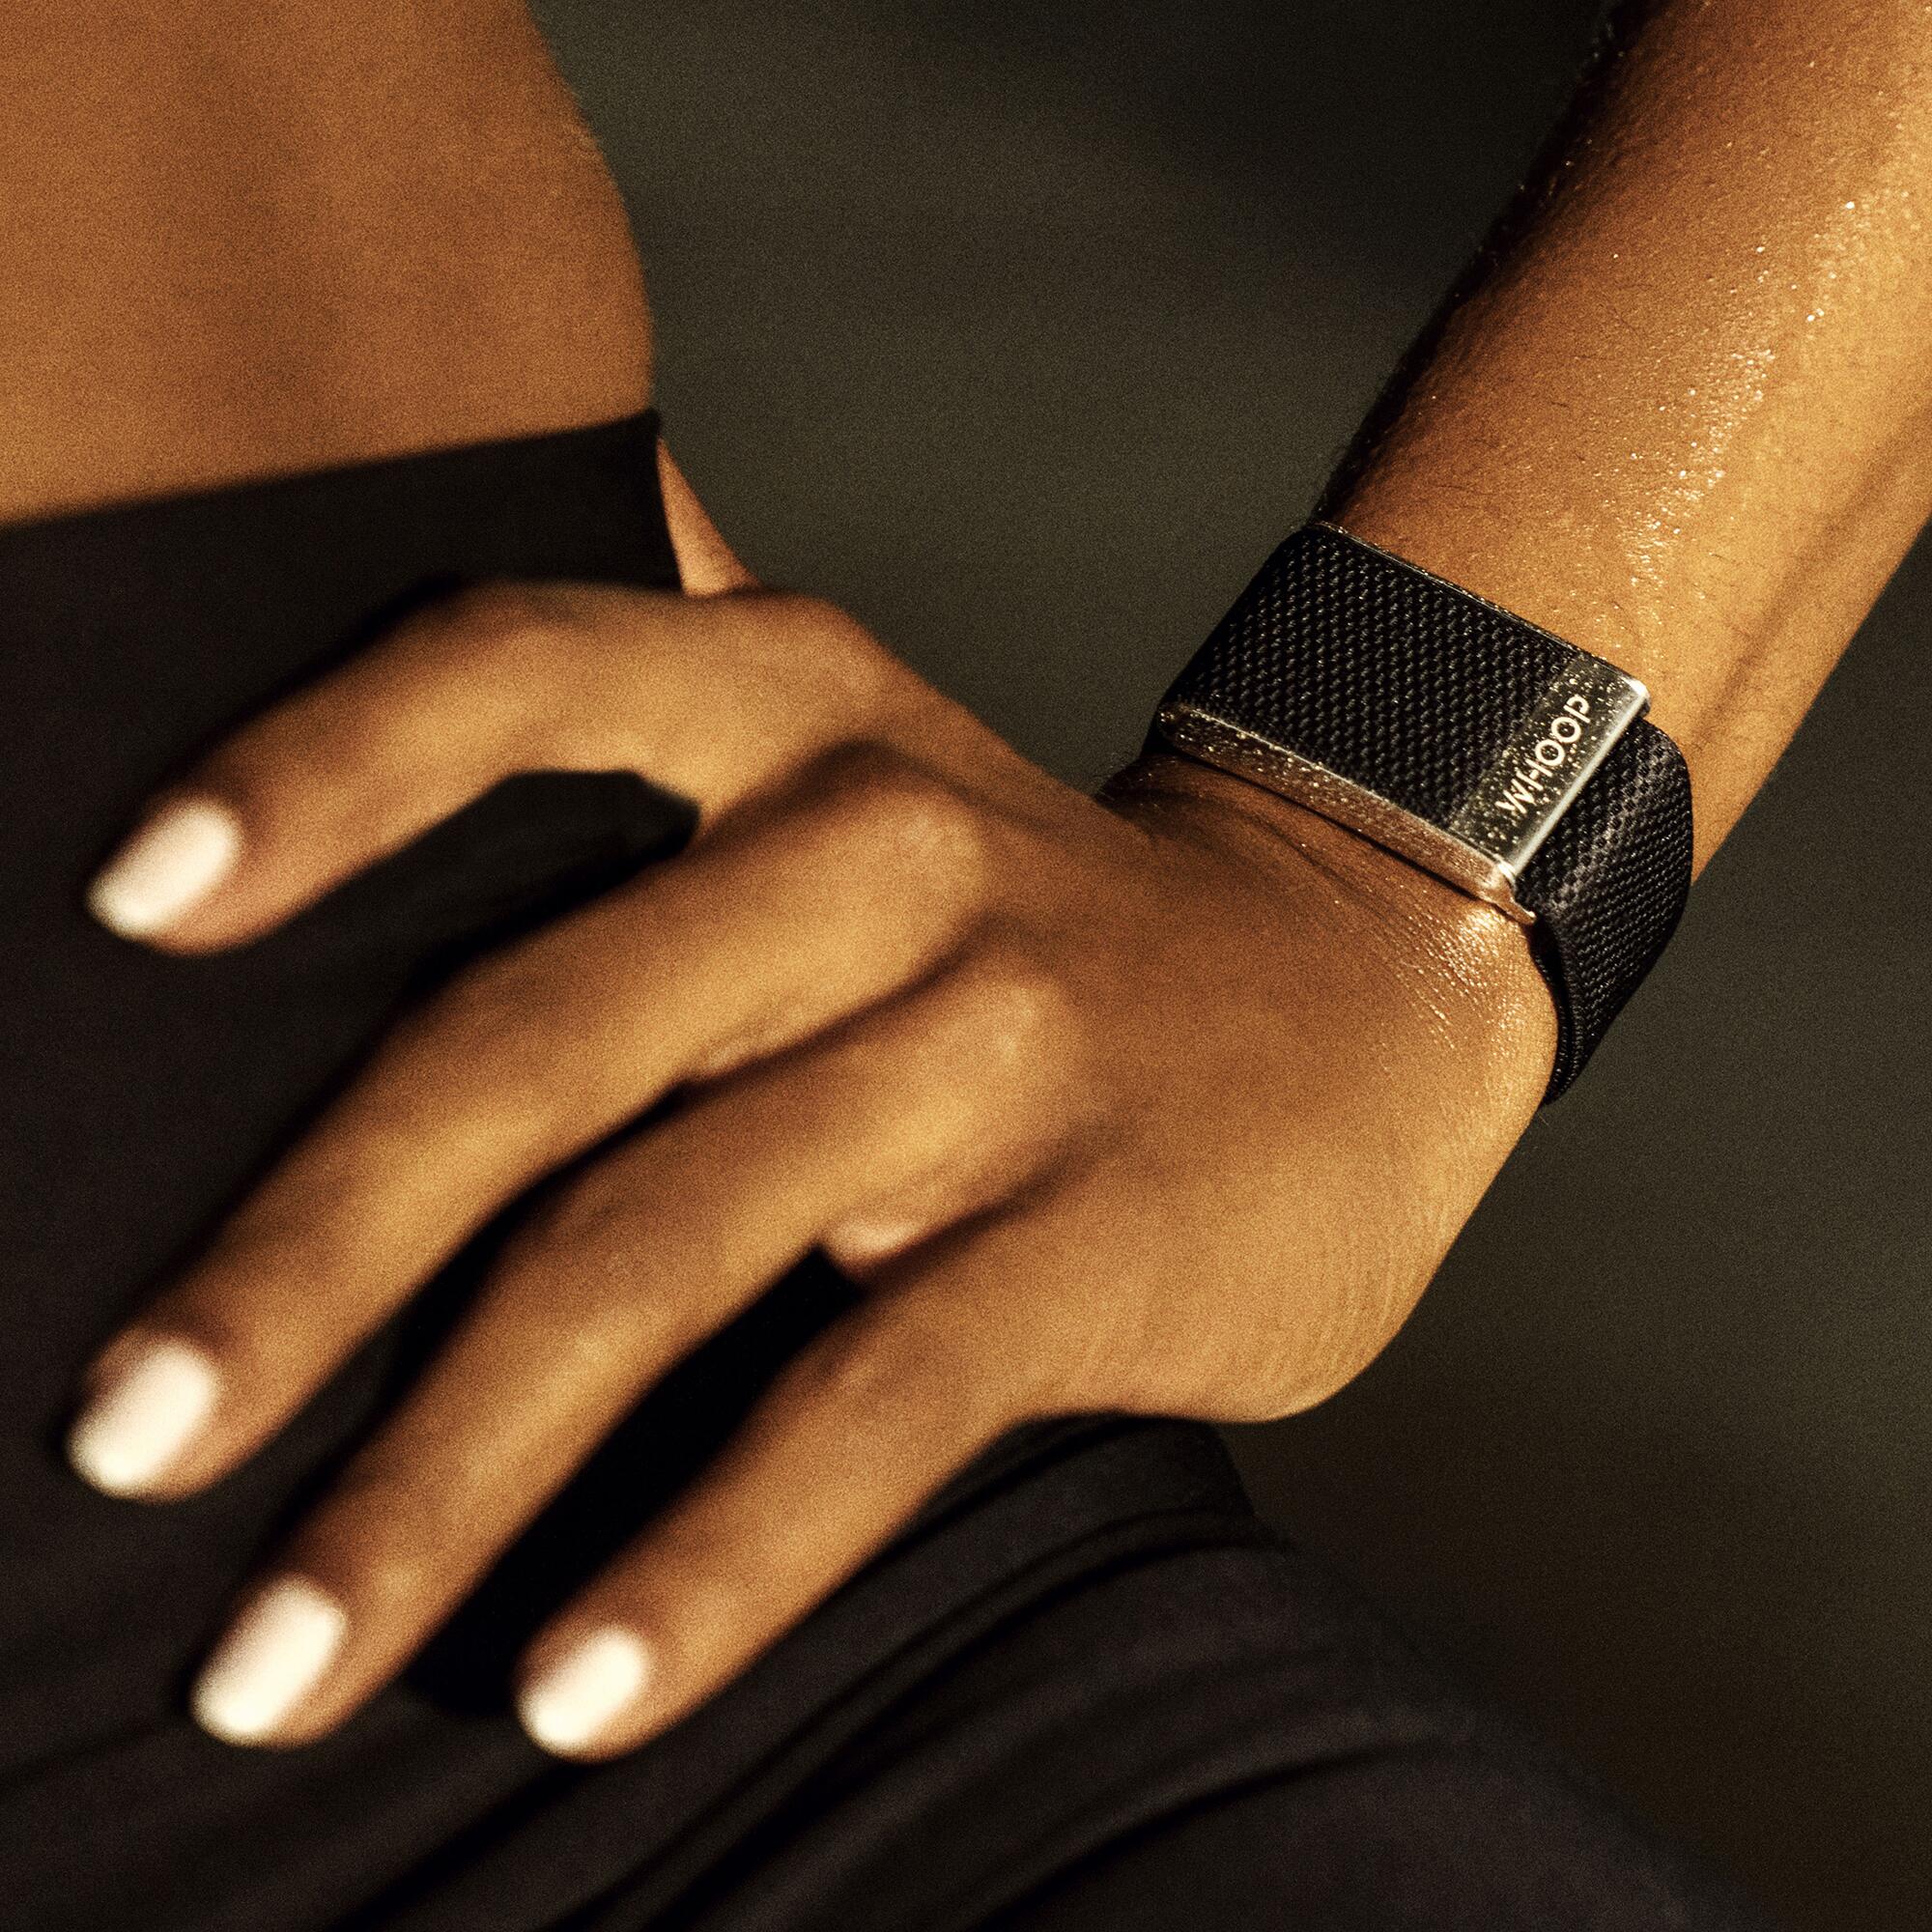 Crystal Luxe Band  WHOOP - The World's Most Powerful Fitness Membership